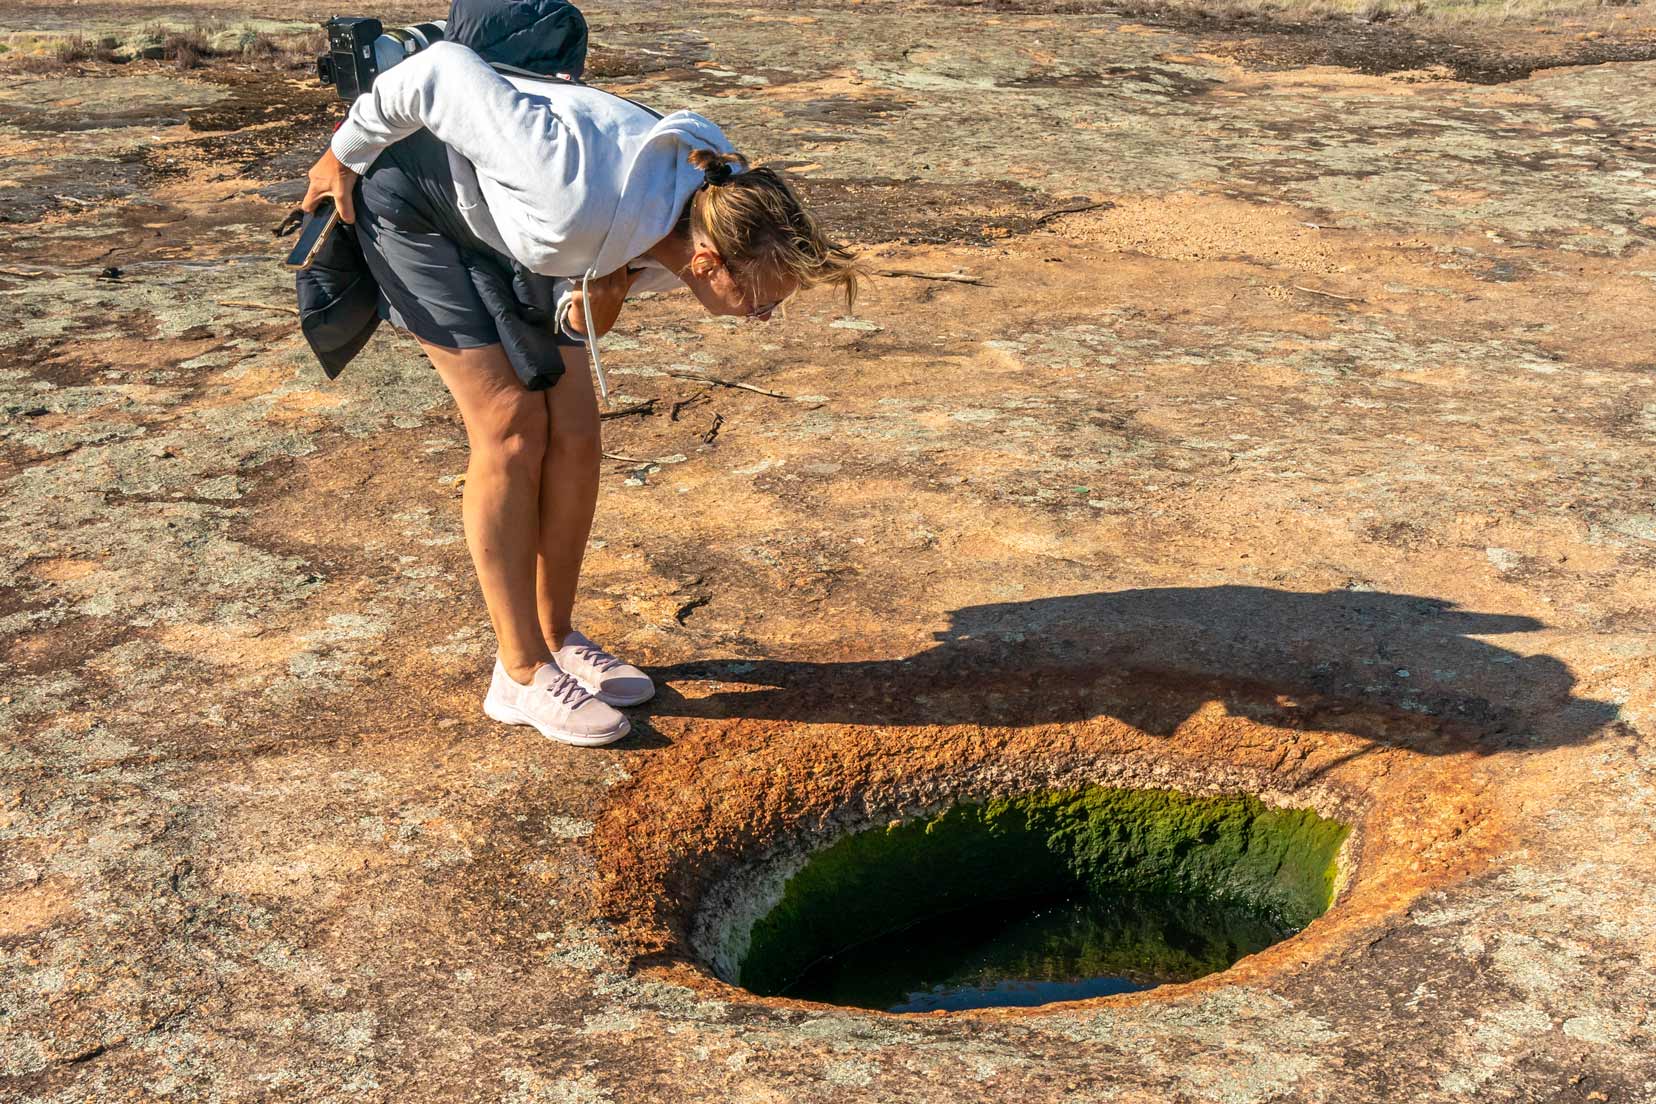 Shelley peering in to a gnamma hole - a natural well in rock